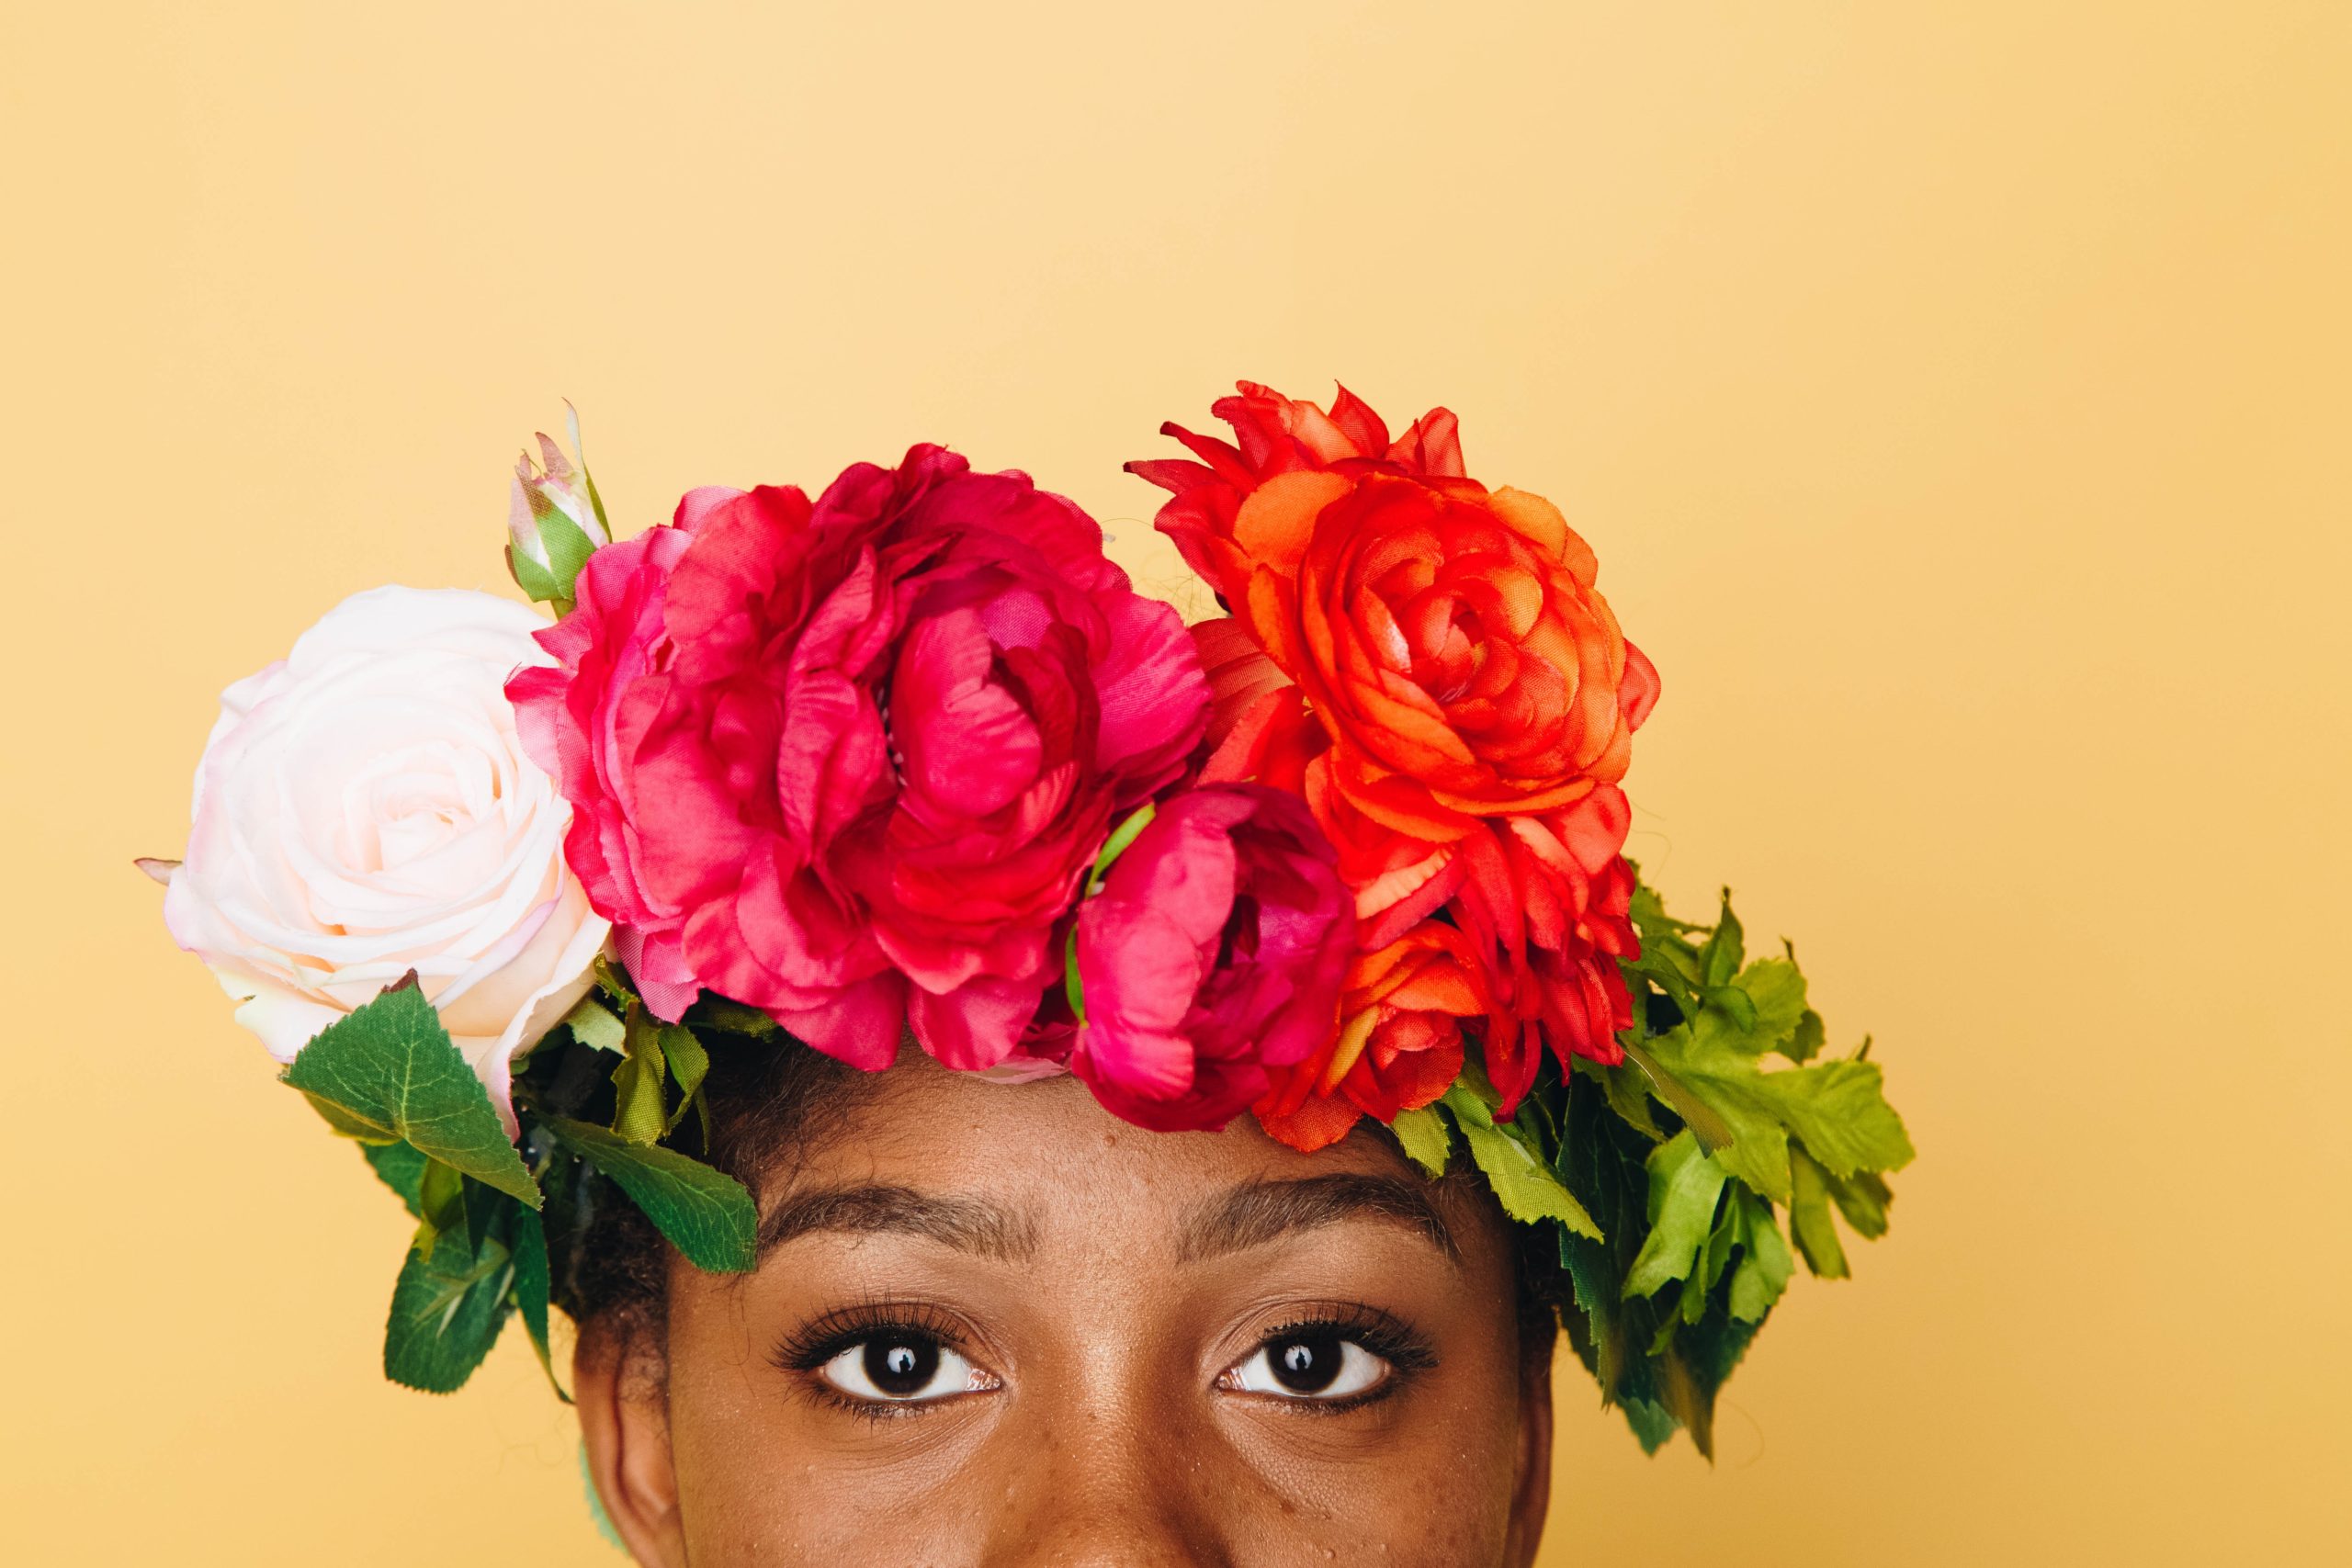 Woman with headband of flowers